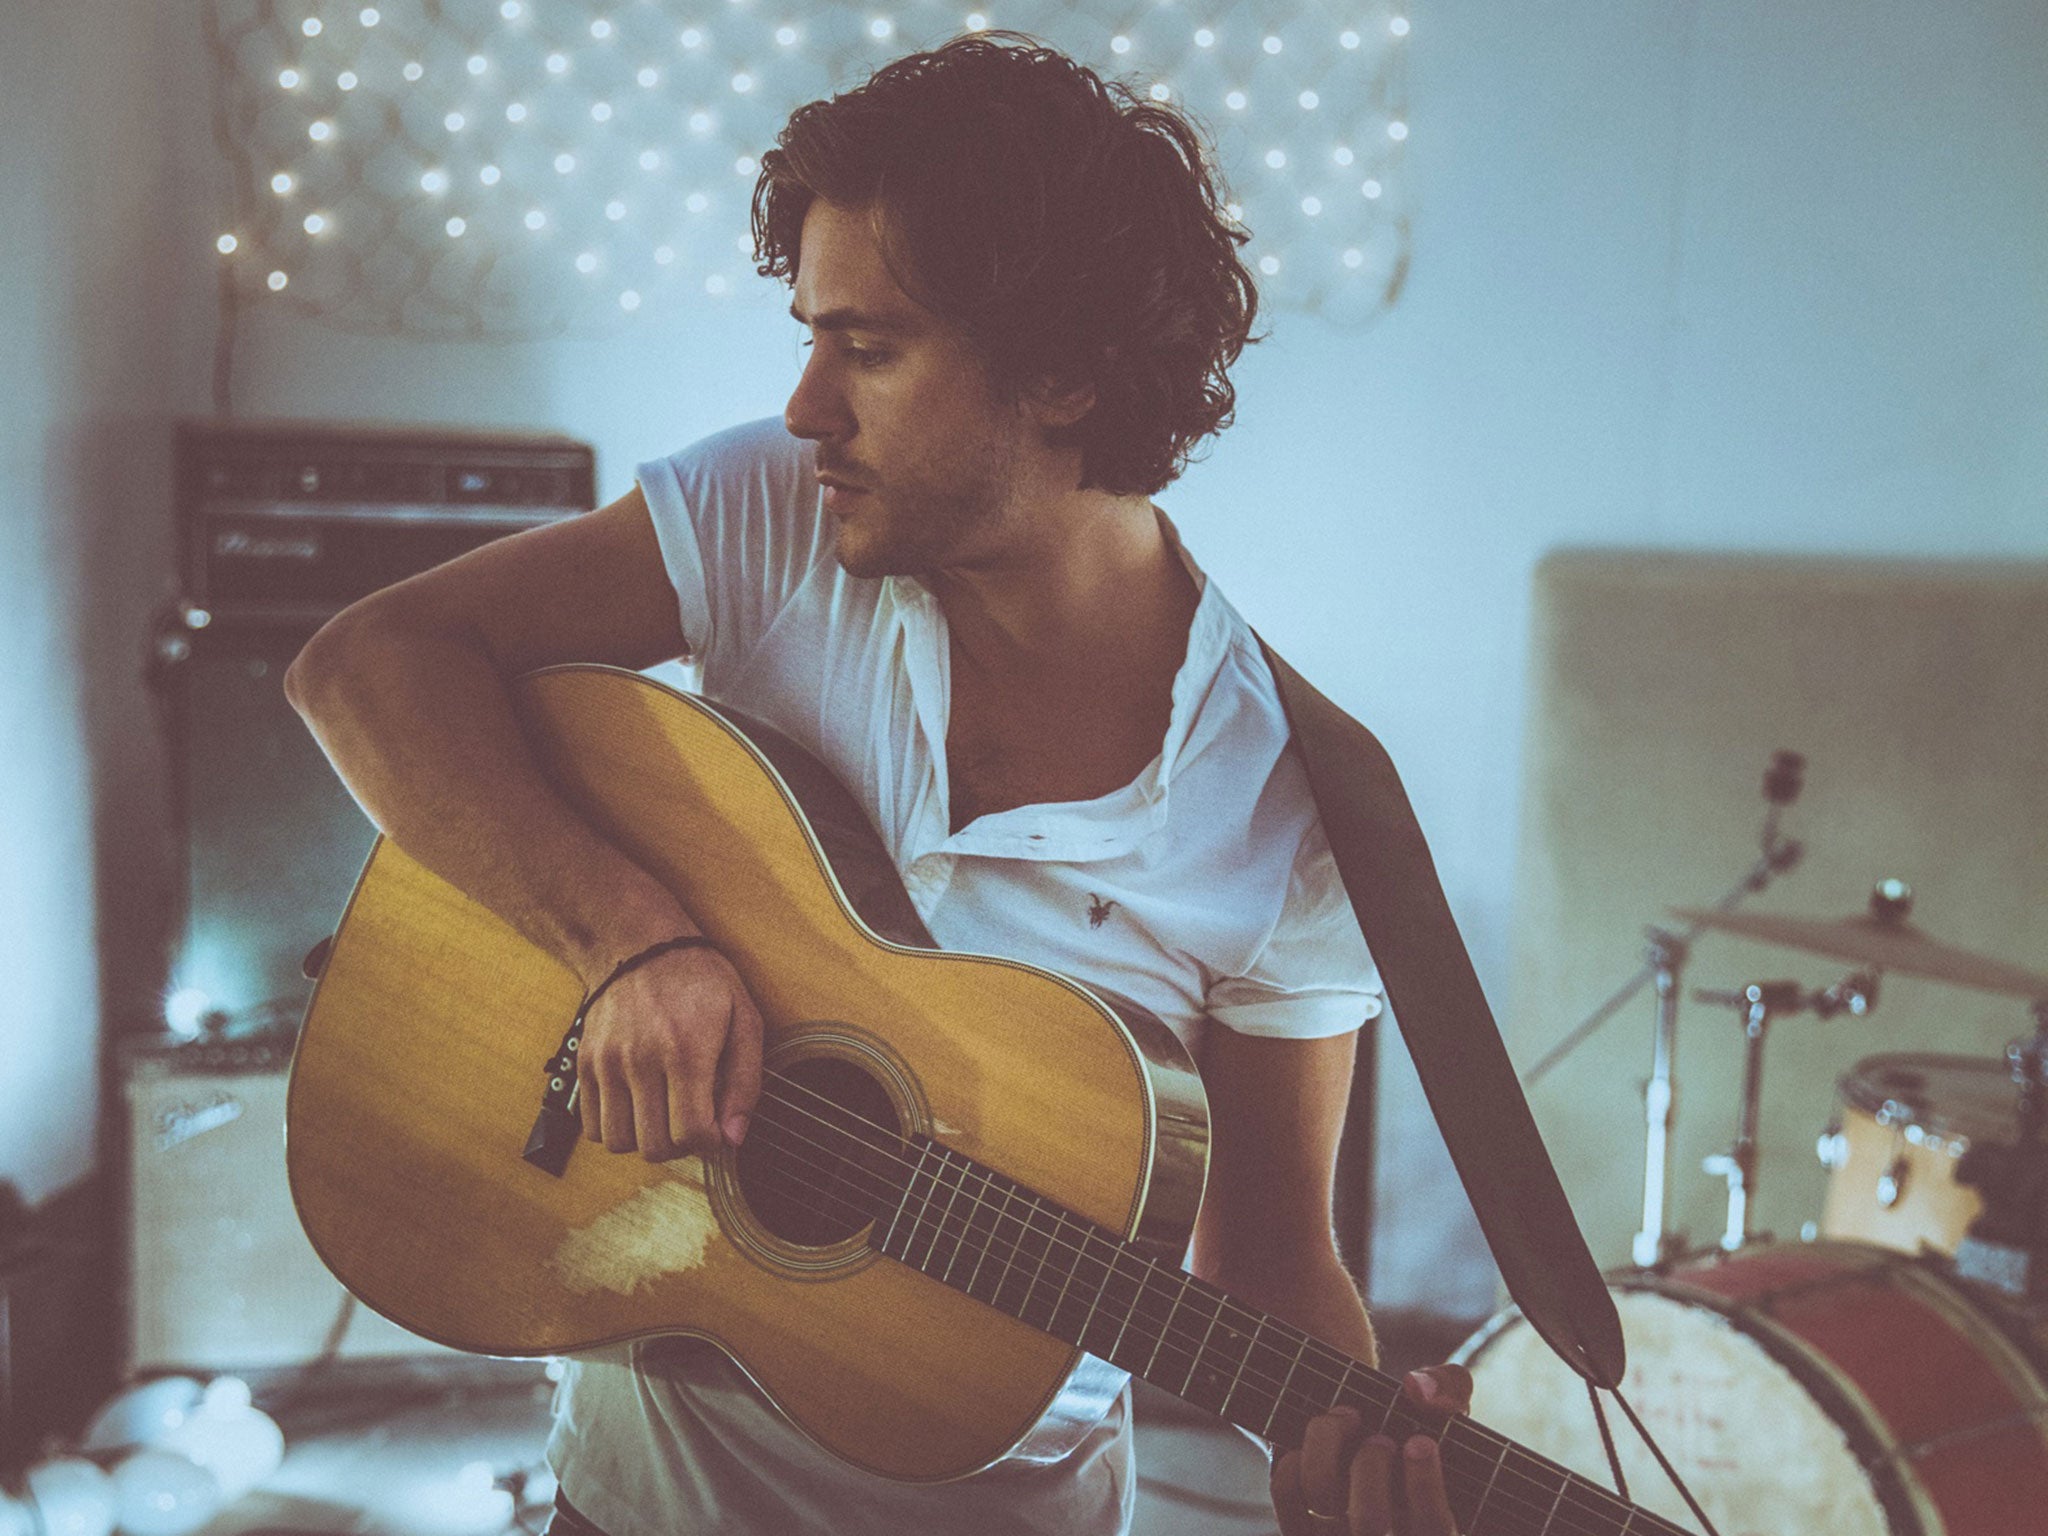 The singer Jack Savoretti, whose new album Written in Scars’ is released in February